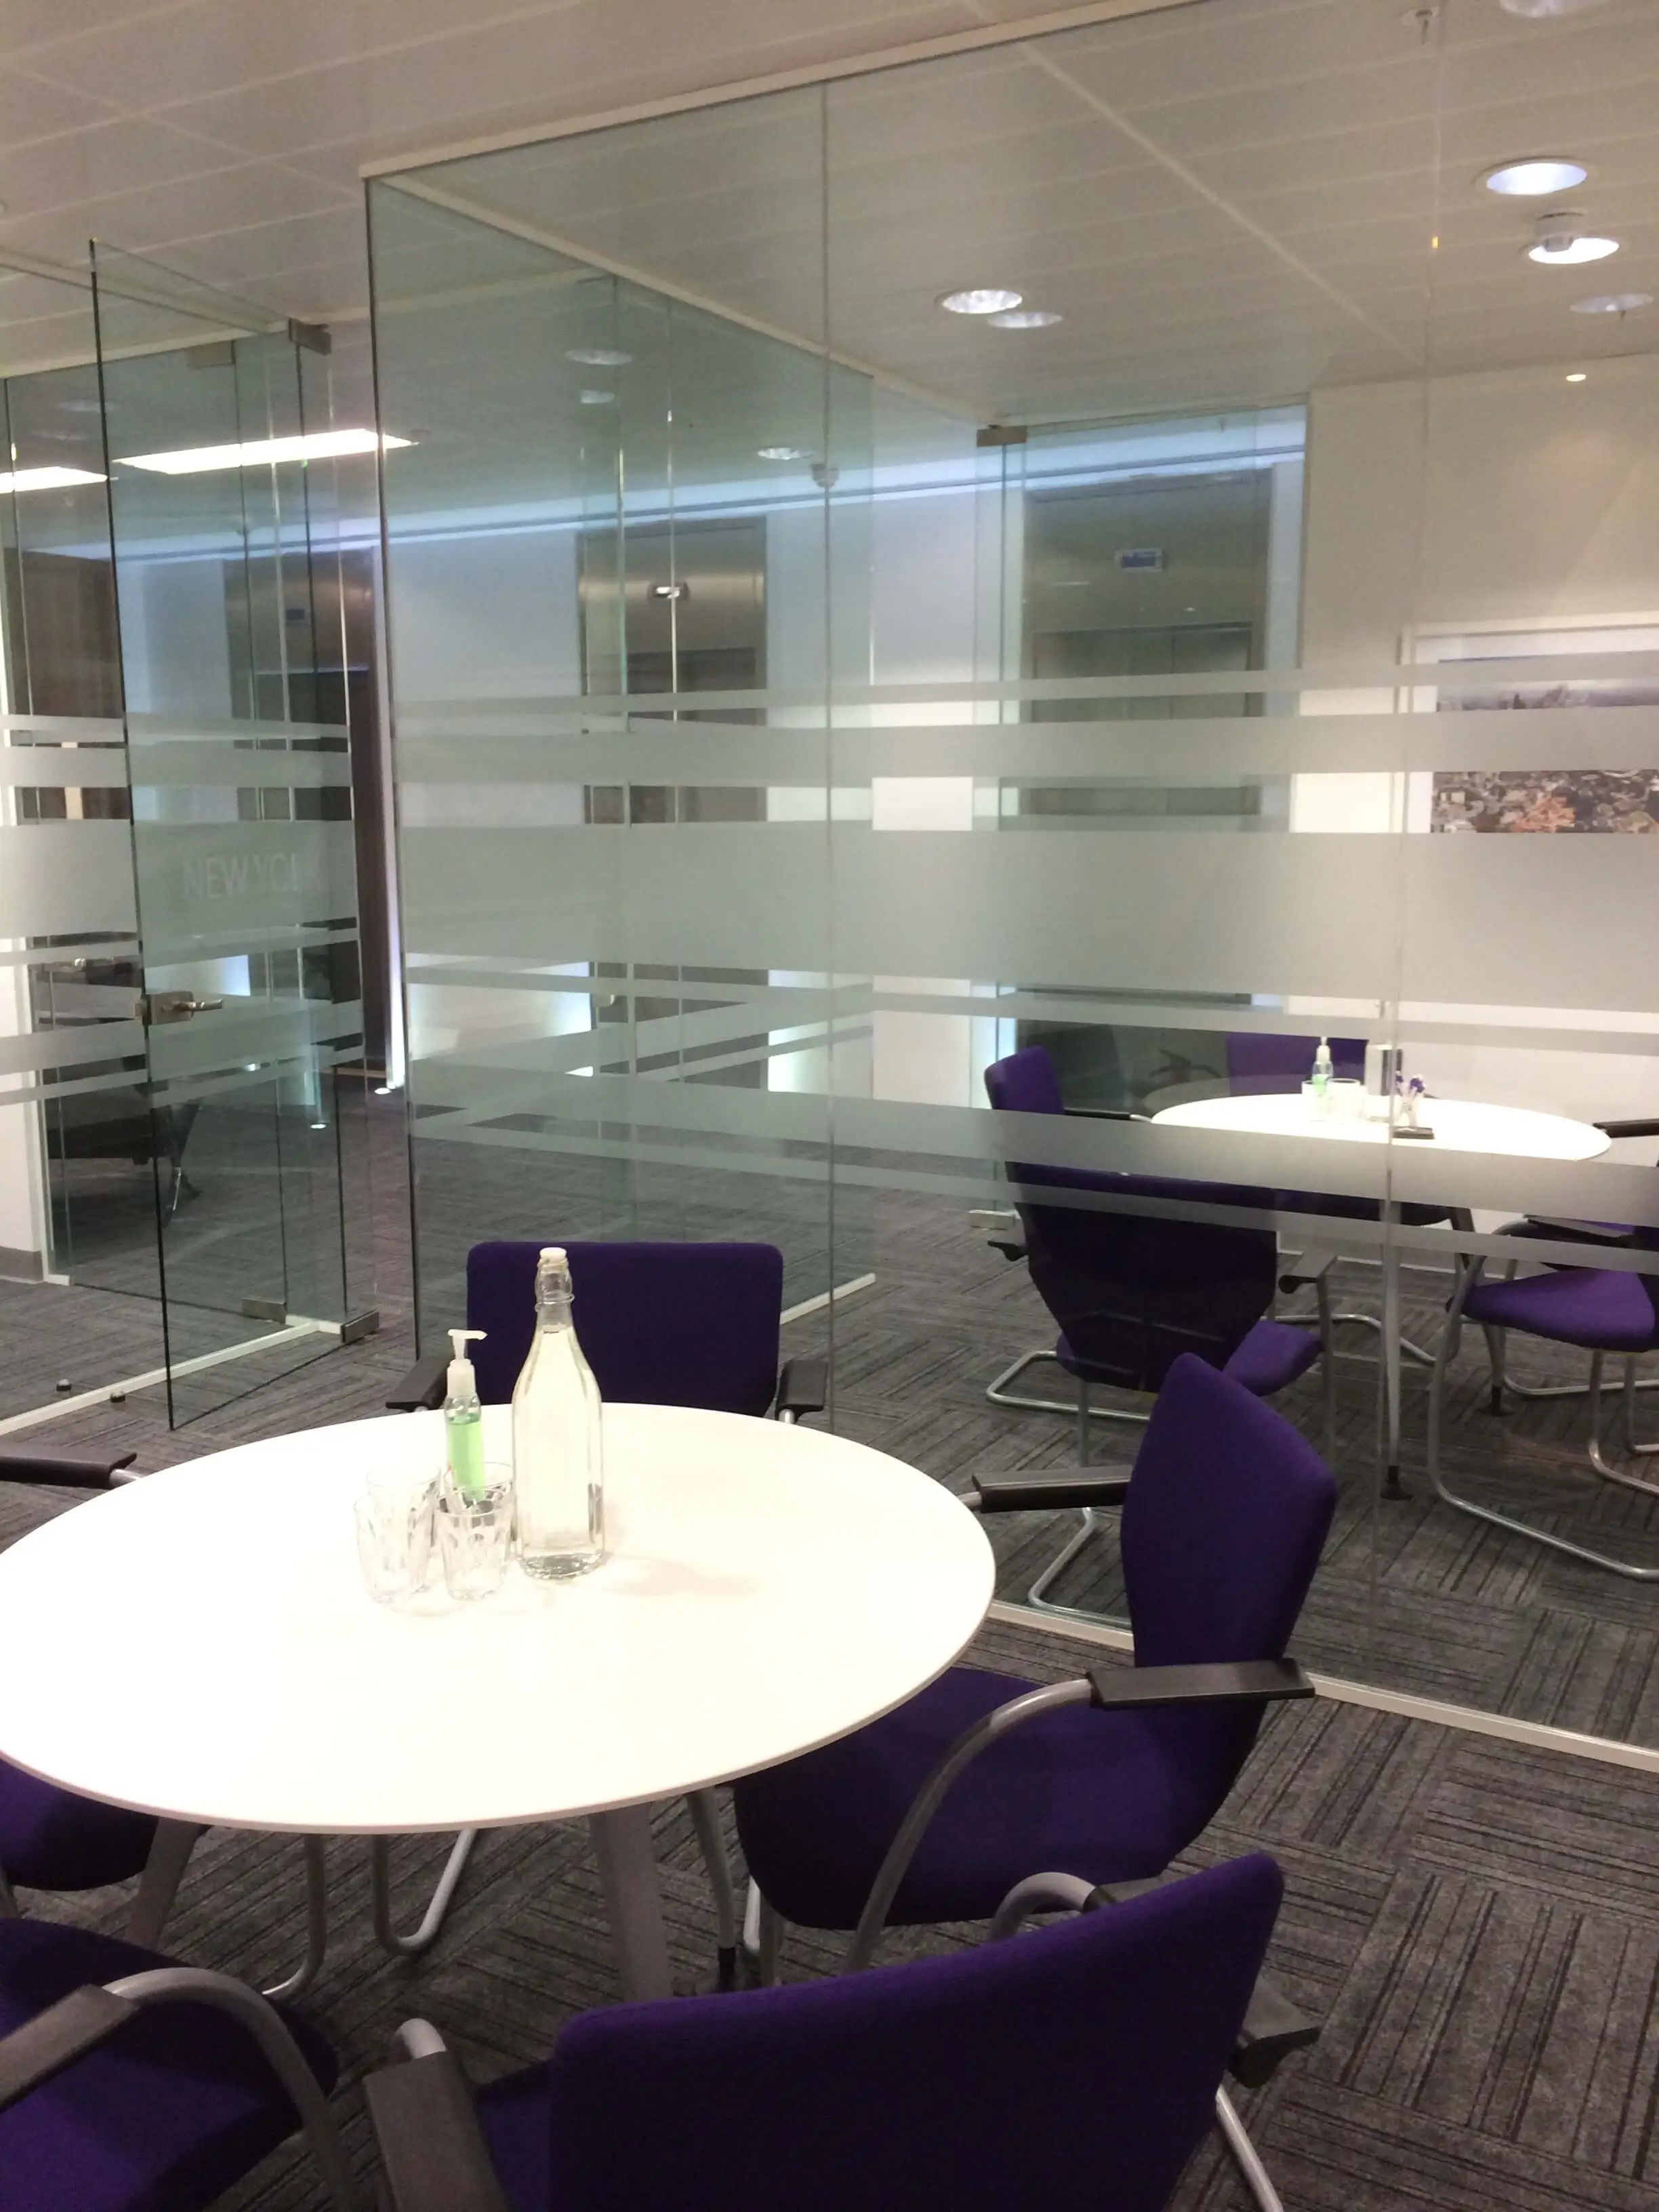 Meeting spaces divided with designer glass partitions